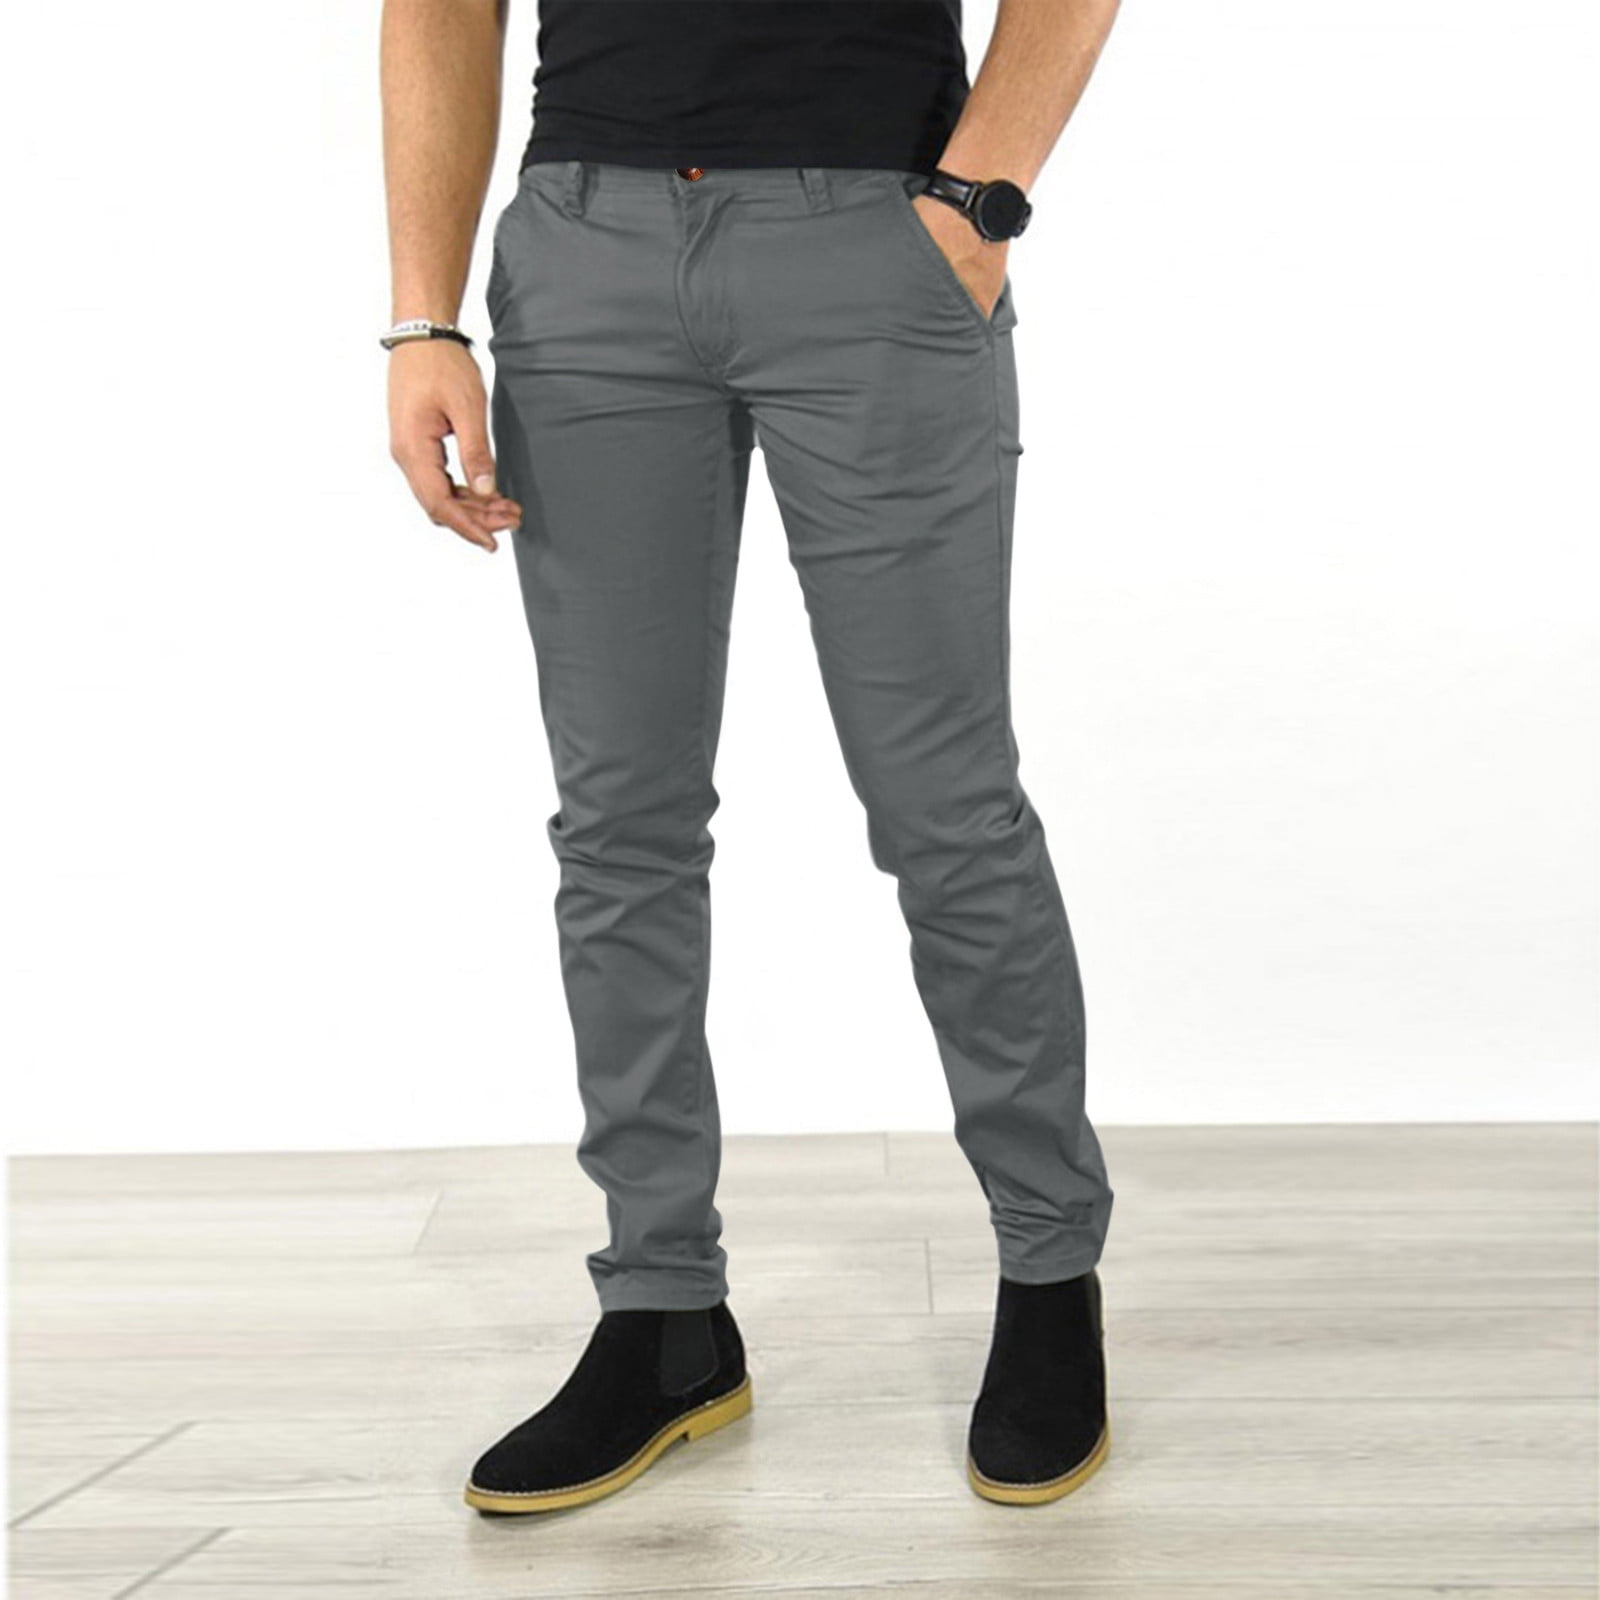 Light Grey and Sky Blue Color Trending Latest New Fashion Low Price  Stretchable Pants Trousers for Men Combo of 2